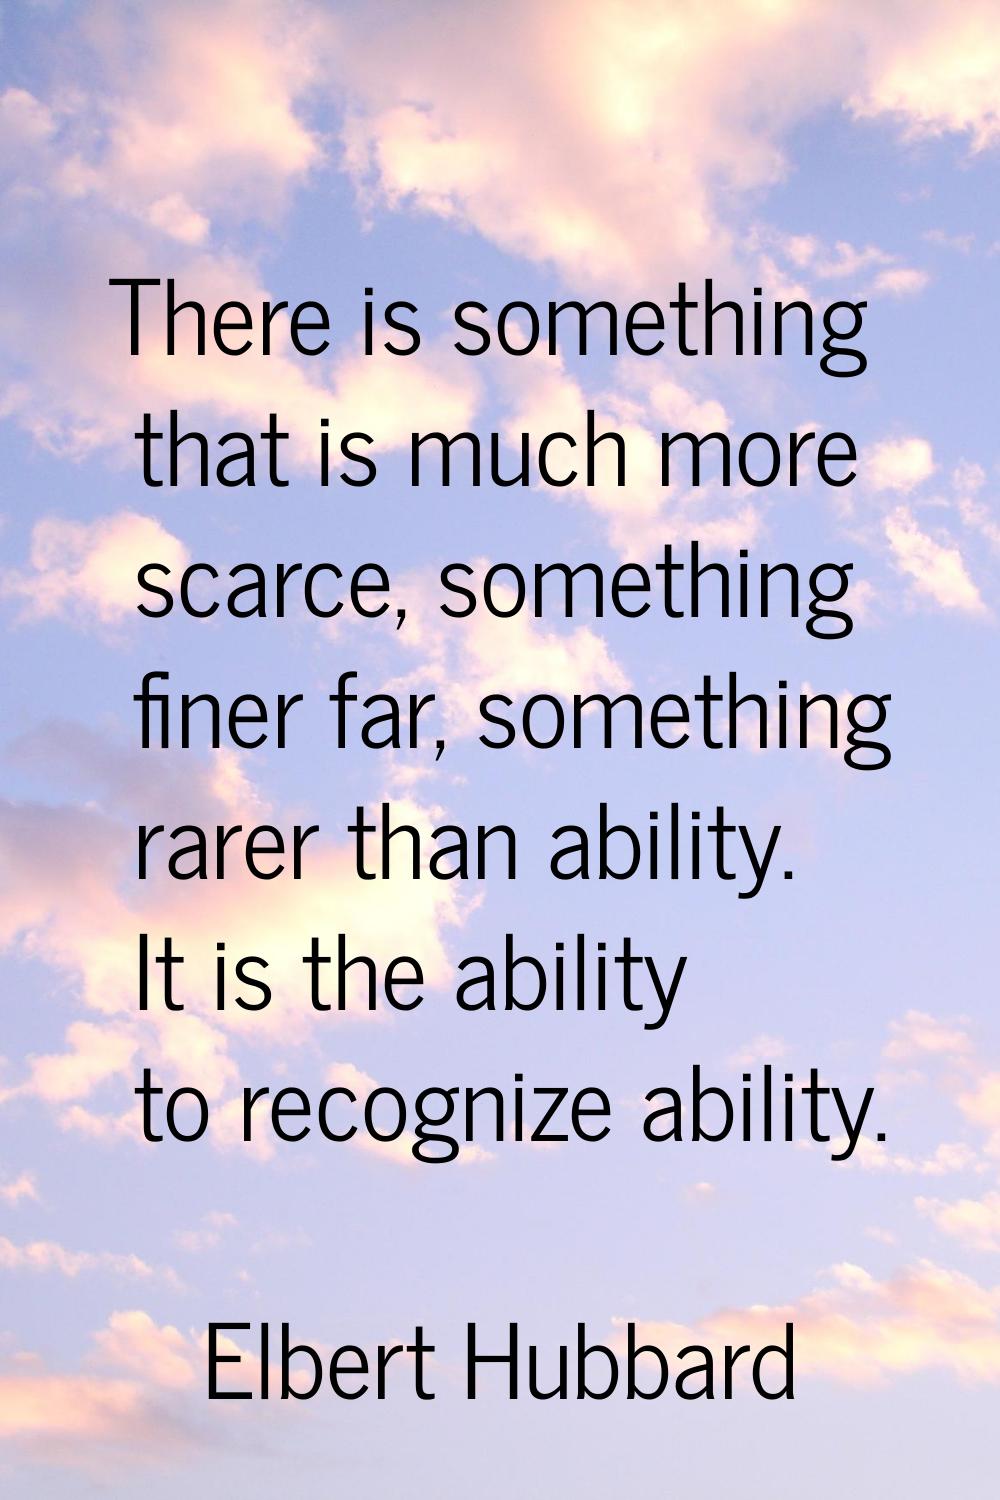 There is something that is much more scarce, something finer far, something rarer than ability. It 